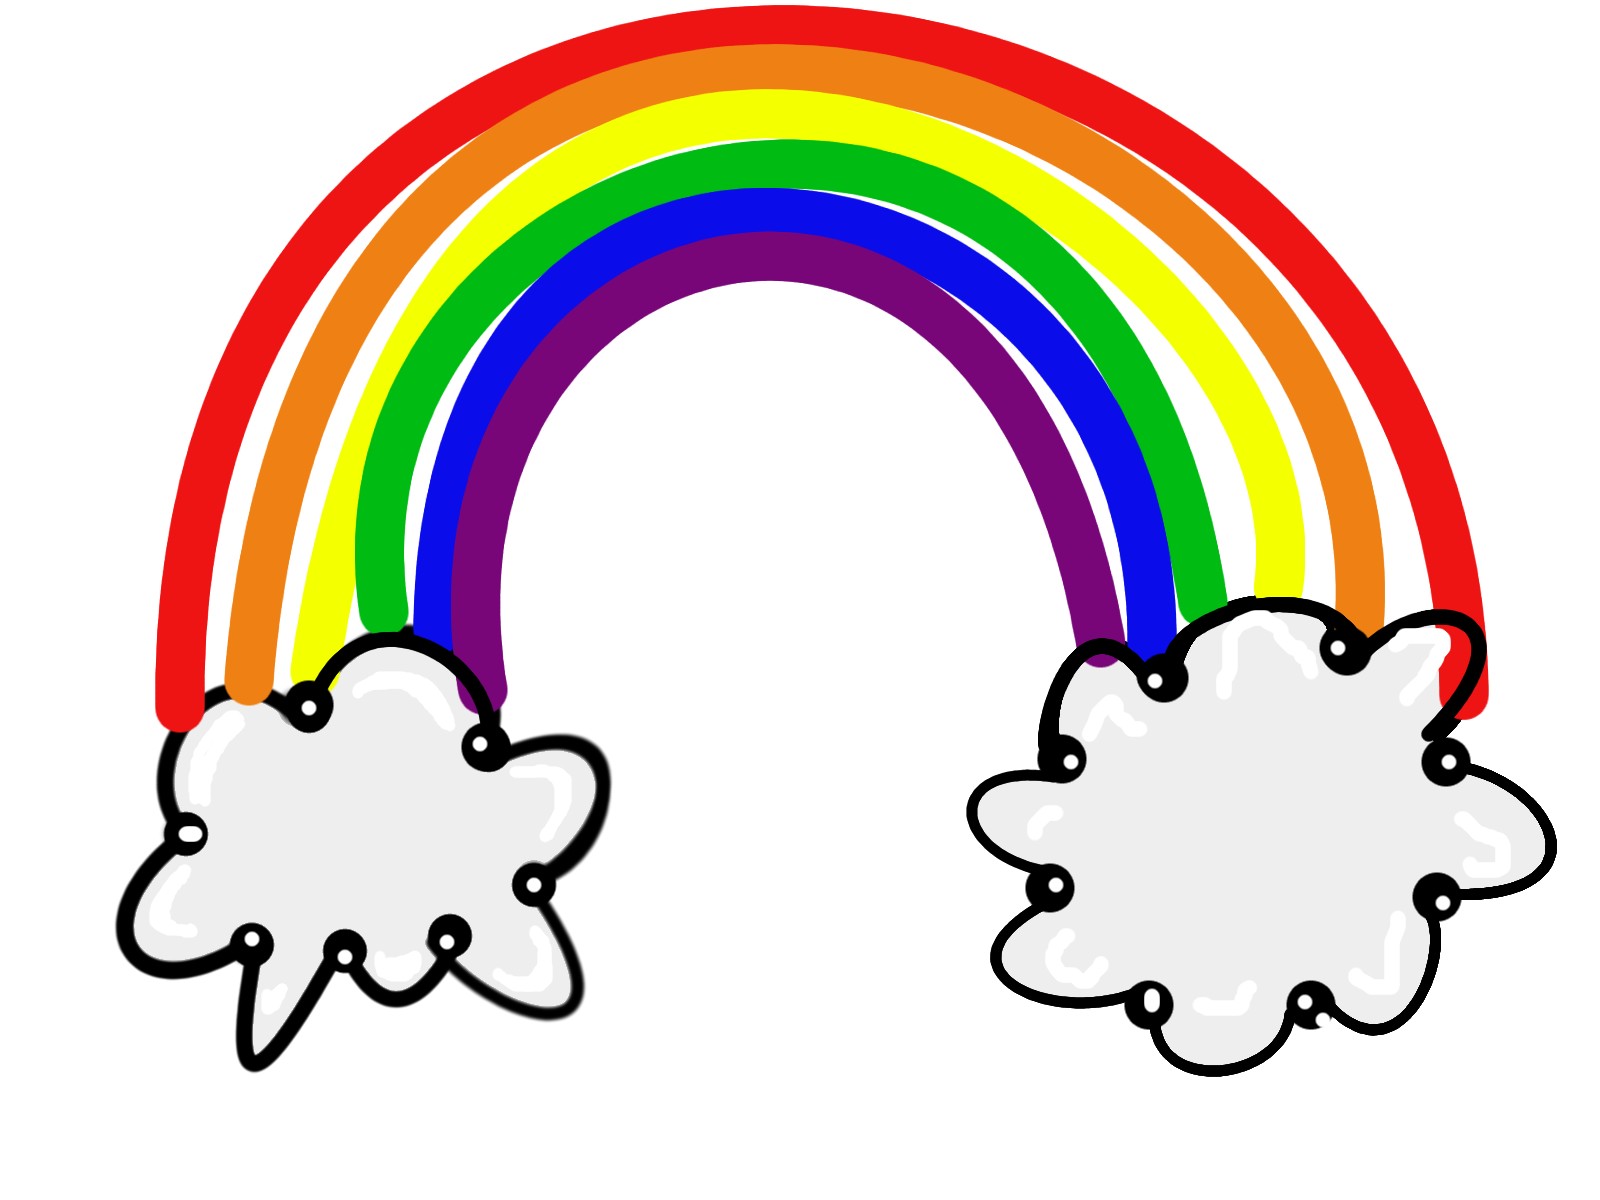 Black and white rainbow outline free clipart images clipartix